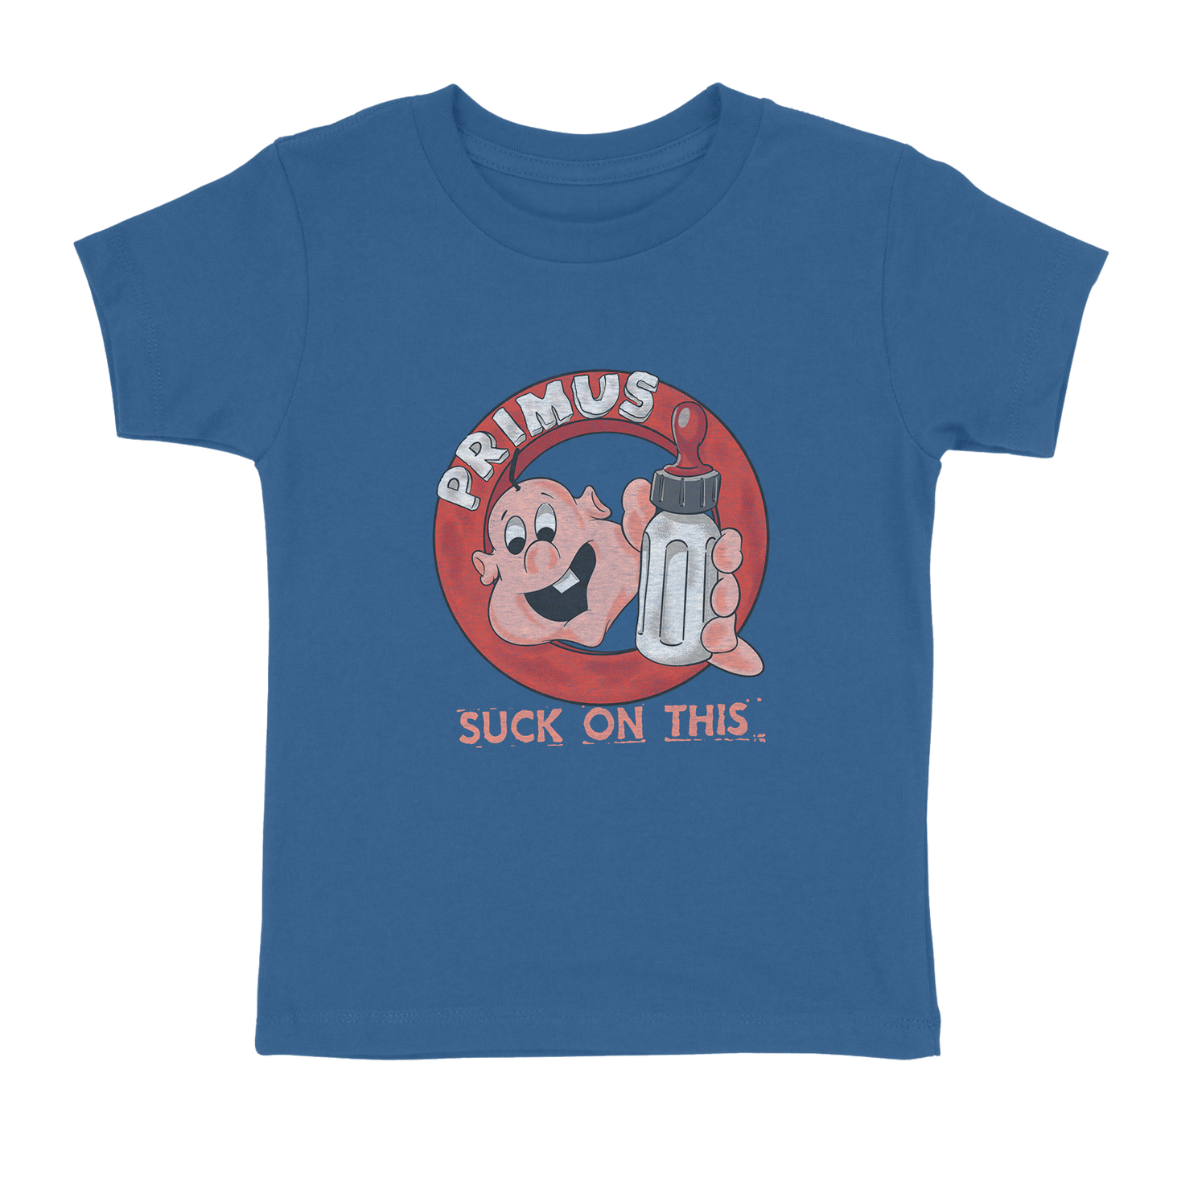 Primus - Suck On This Youth Tee